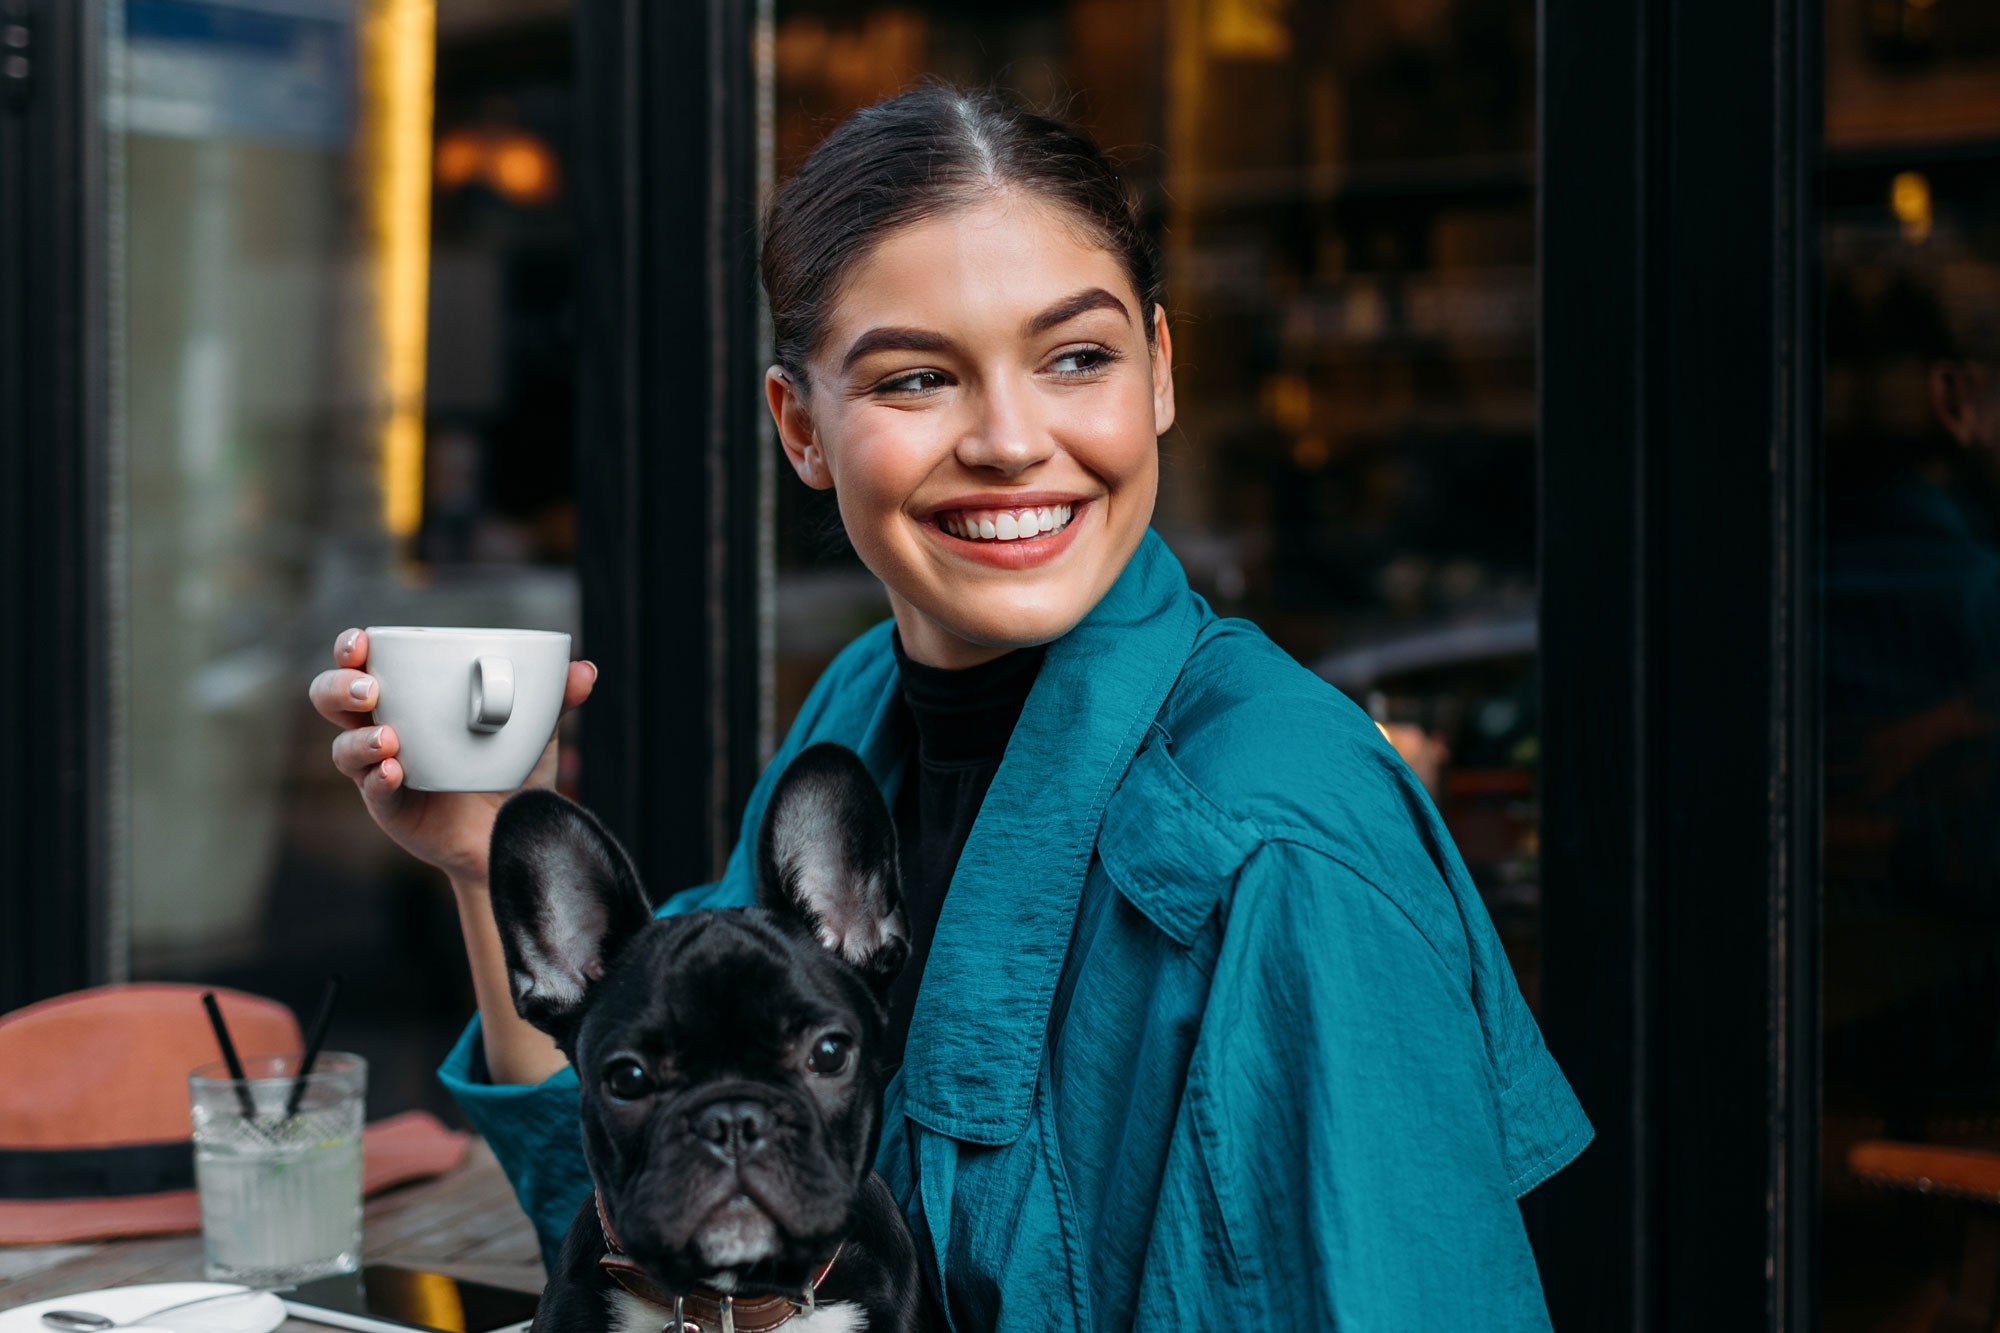 woman with her french bulldog, sitting in front of the restaurant, holding espresso cup and waiting for someone.